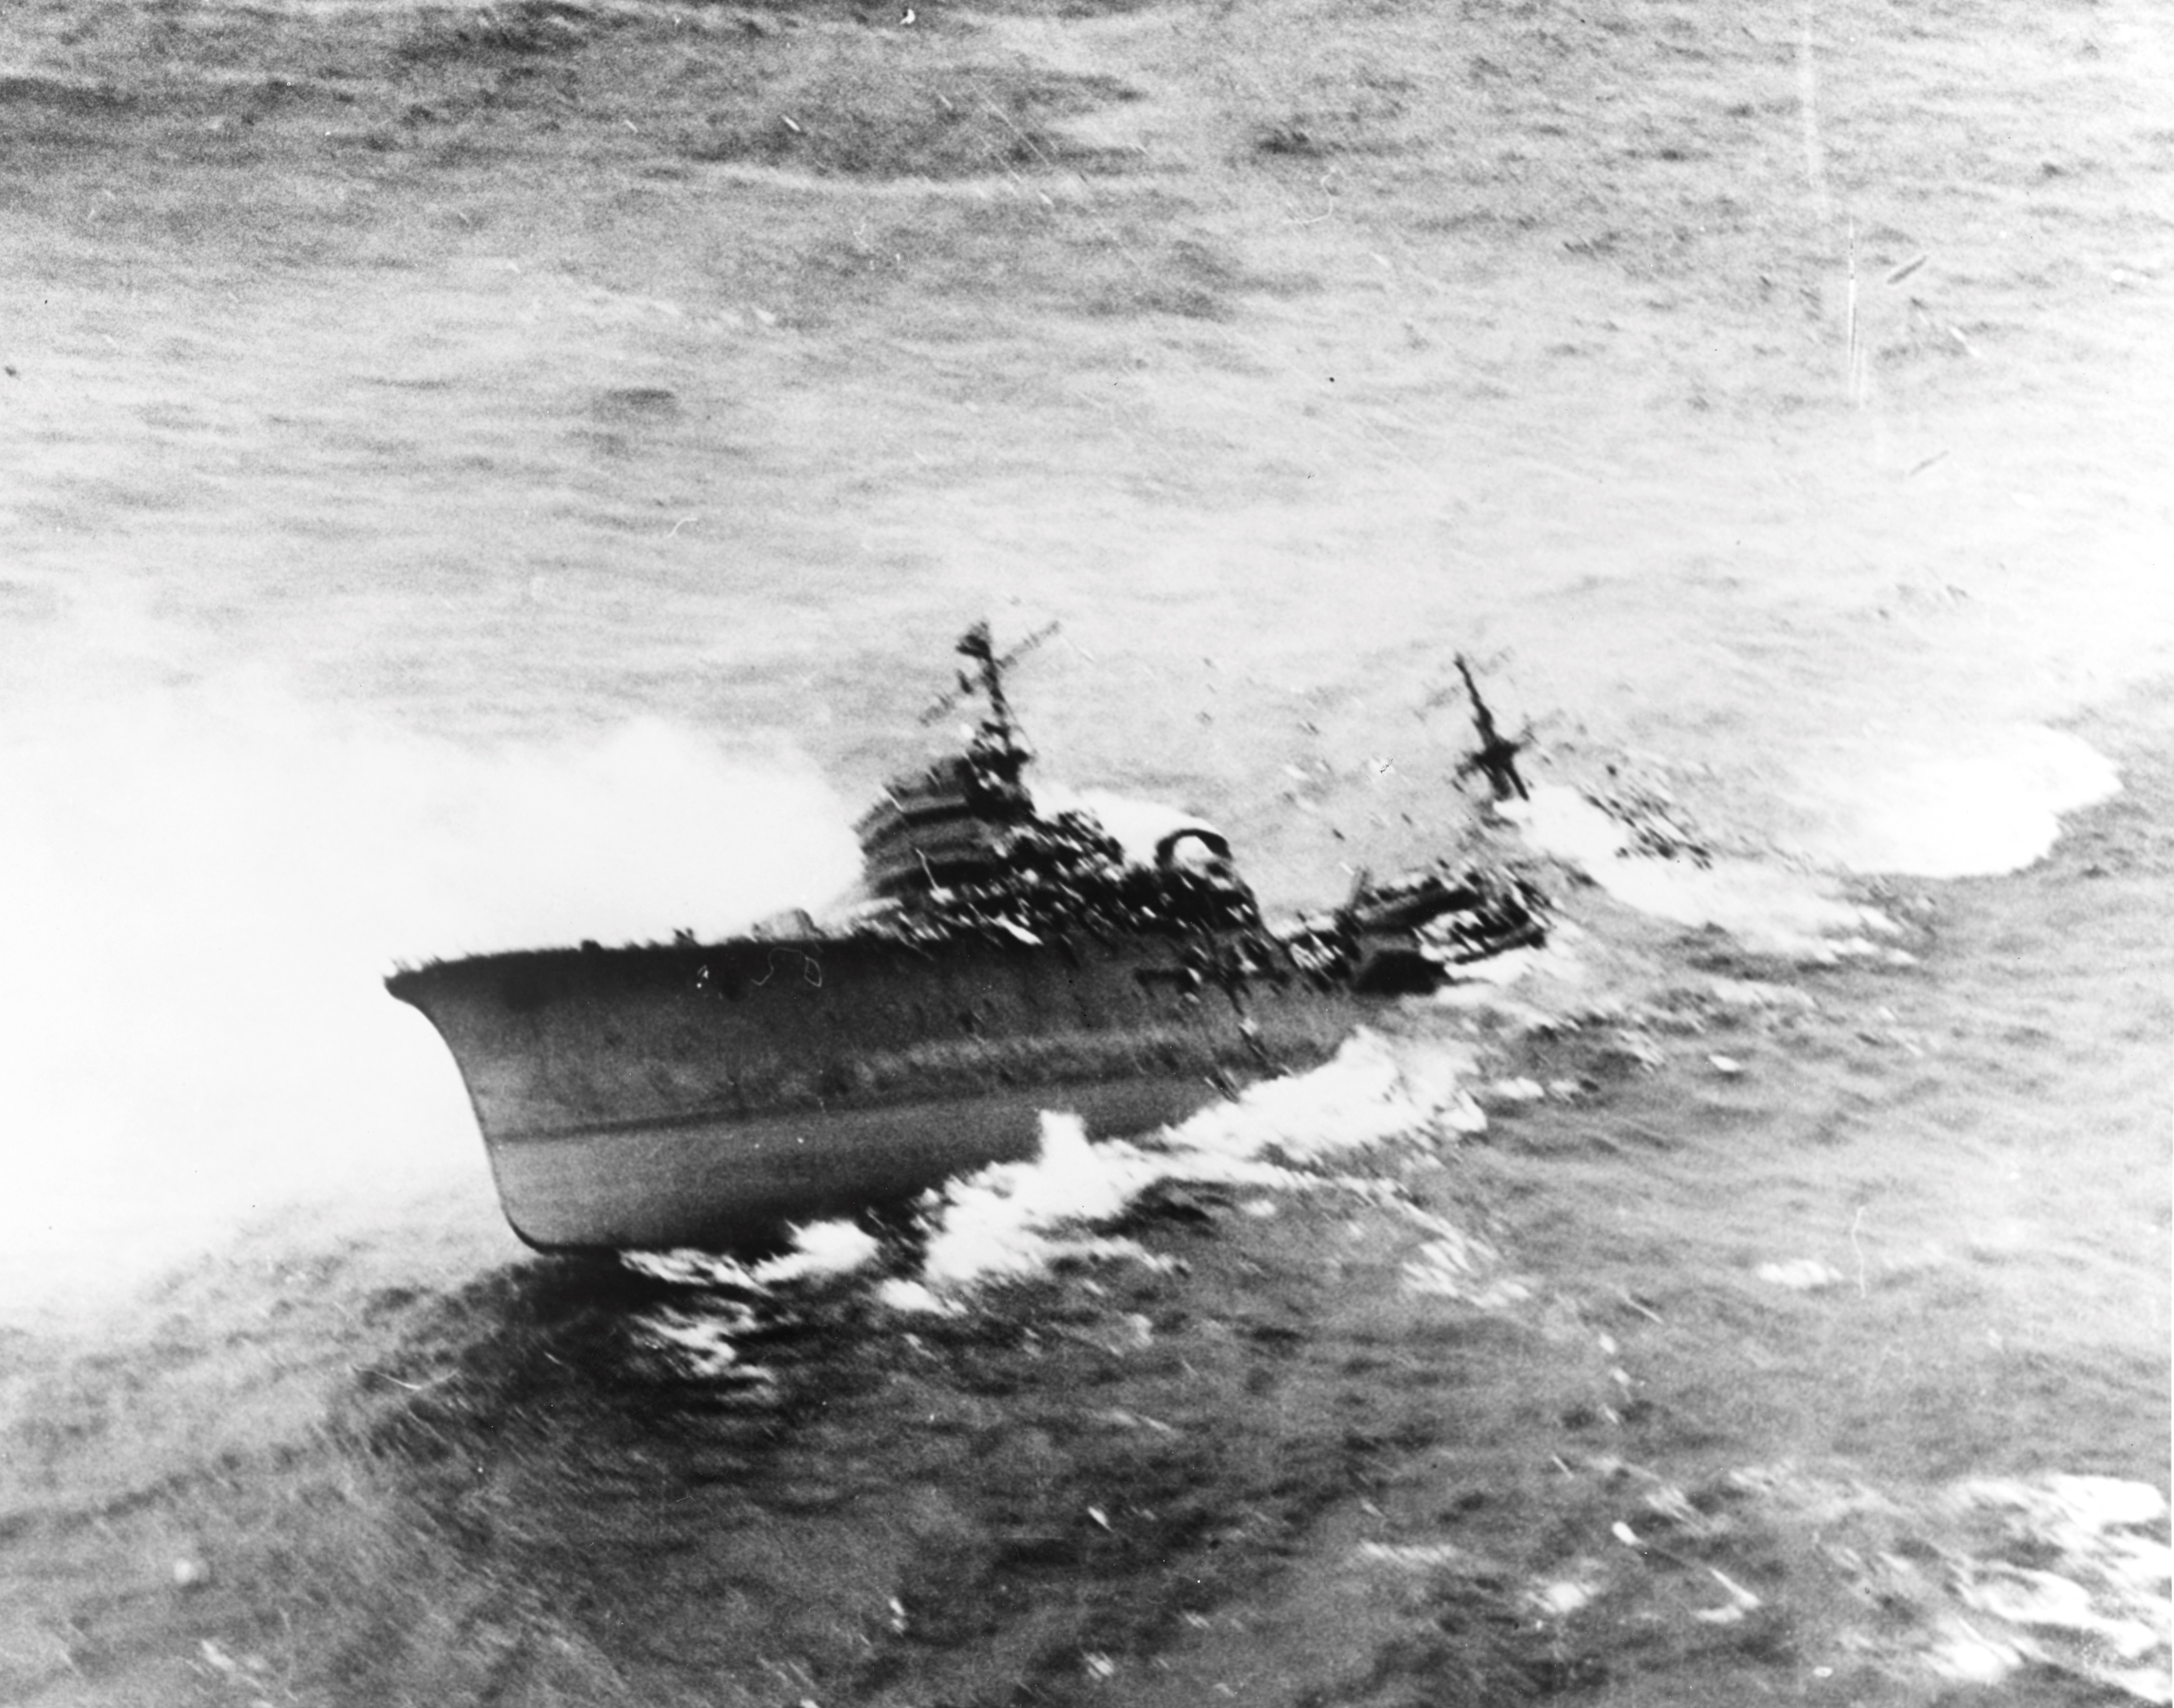 Japanese cruiser Kashii sinking by the stern after being attacked by United States carrier aircraft off the coast of French Indochina (Vietnam) north of Qui Nhon, Jan 12, 1945. Photo 4 of 9